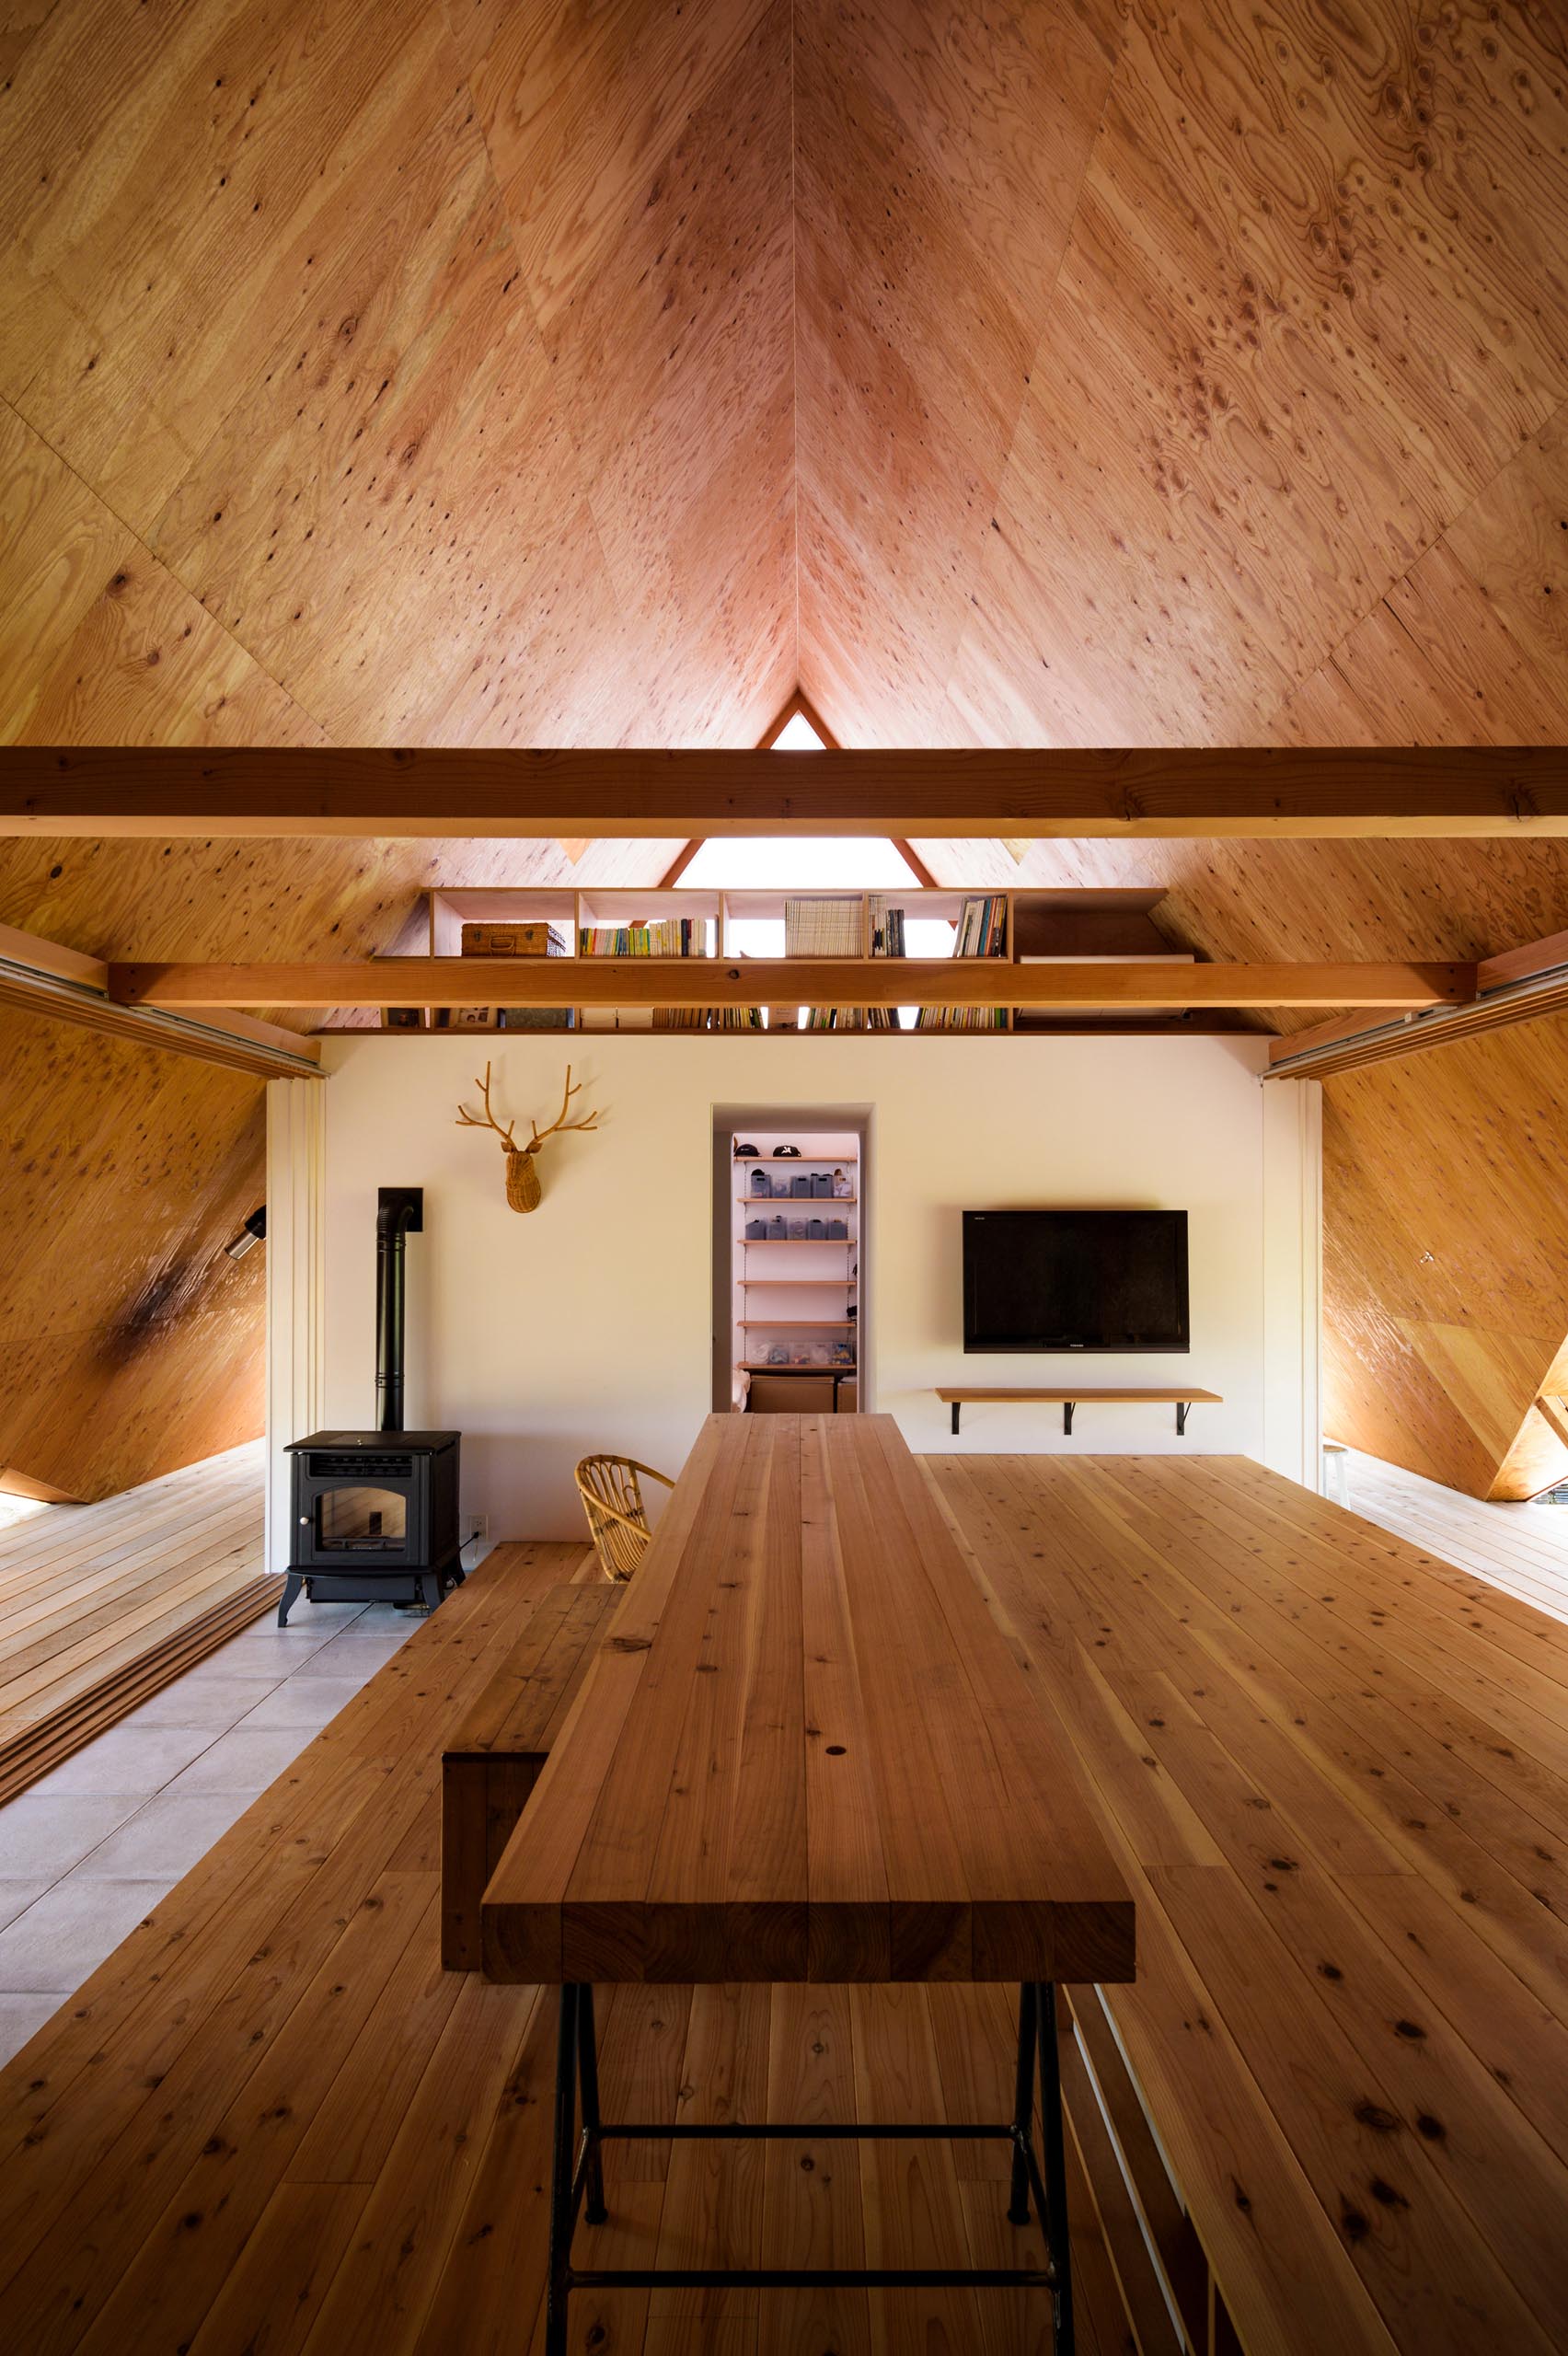 The wood-lined interior of this modern A-frame house has had its storage, partitions, and private rooms removed as much as possible in order to simulate one large open space that adapts to the user’s needs.